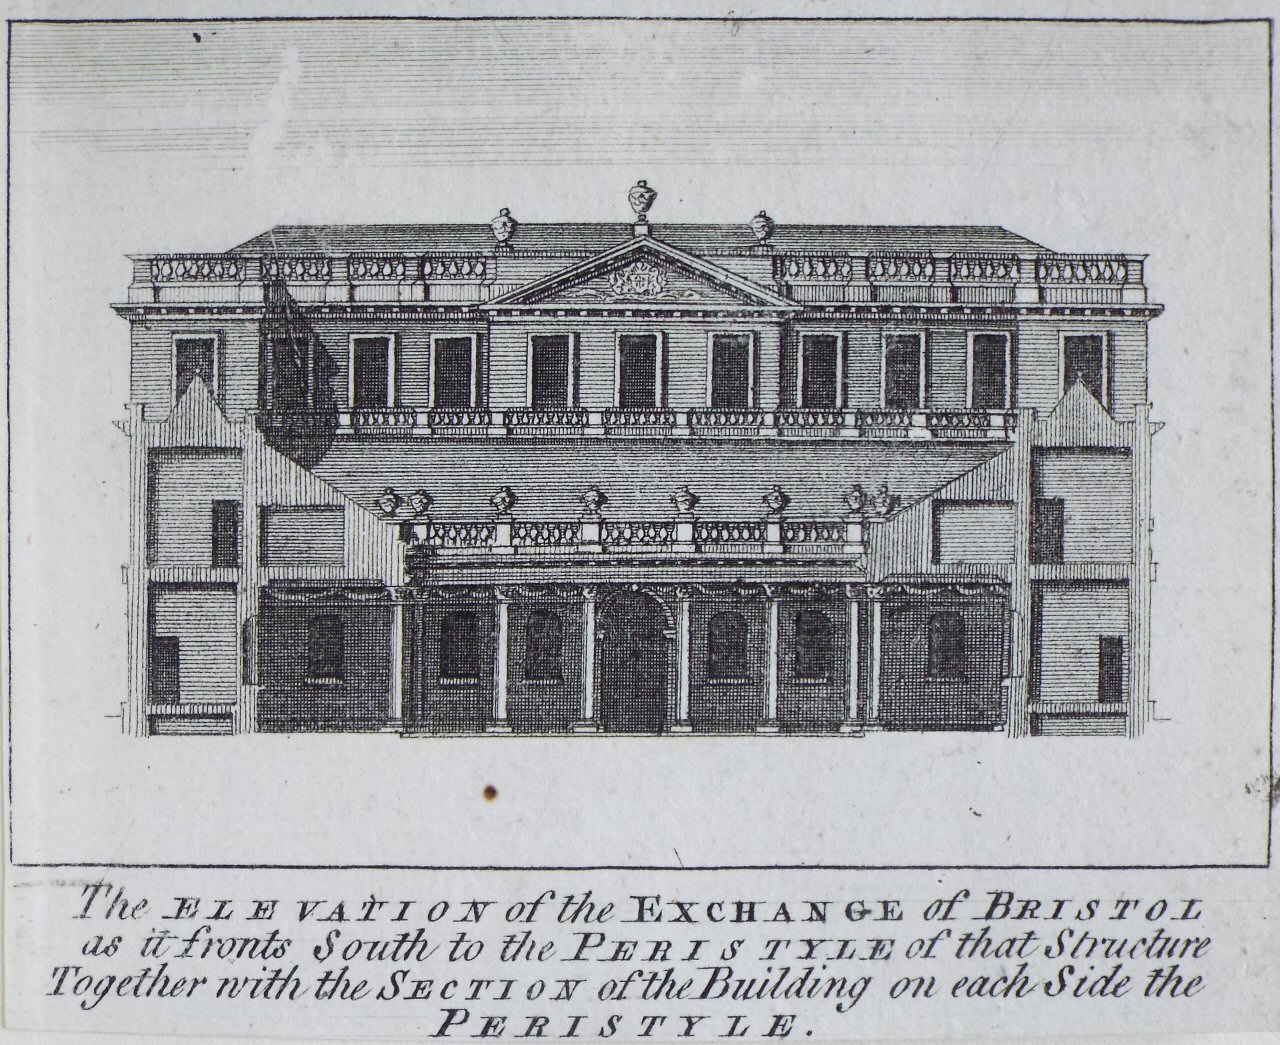 Print - The Elevation of the Exchange of Bristol as it fronts South to the Perisytyle of that Structure Together with the Section of the Building on each Side of the Peristyle.